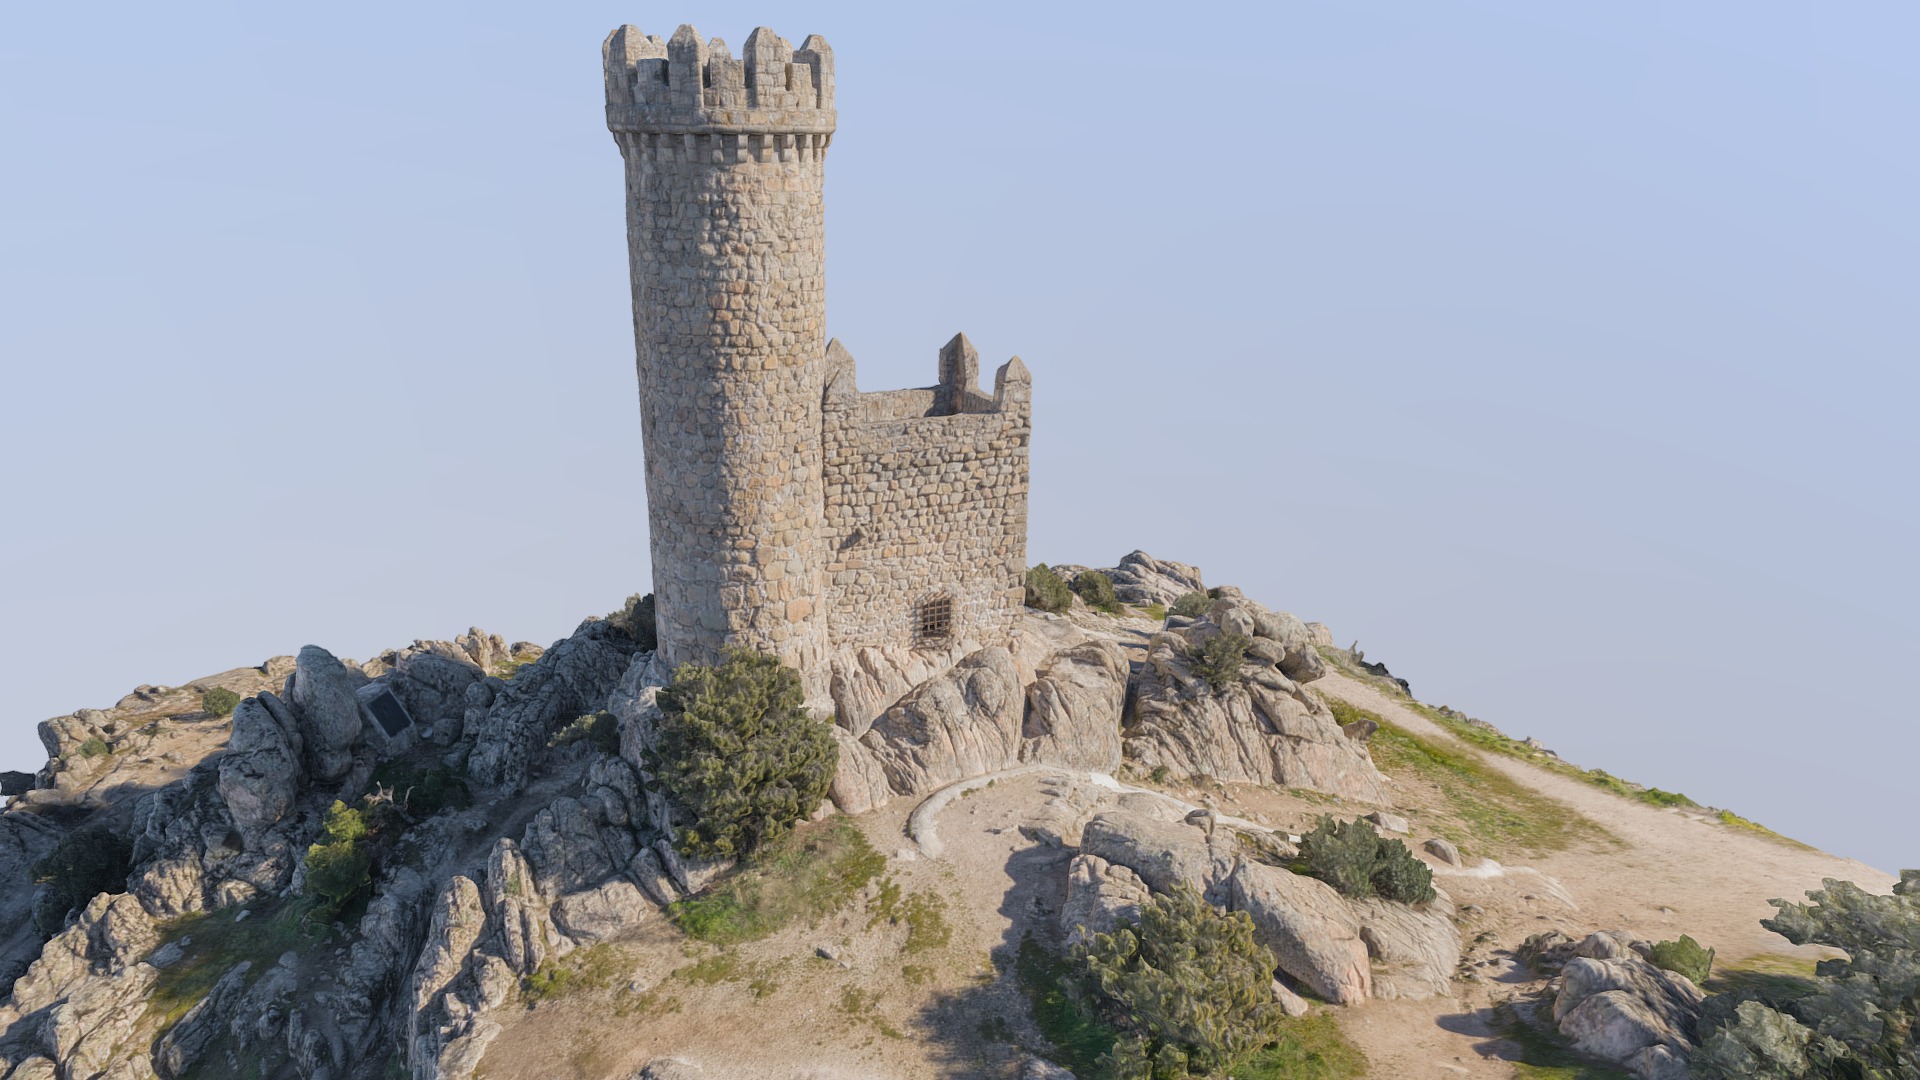 3D model Atalaya de Torrelodones -Torrelodones watchtower - This is a 3D model of the Atalaya de Torrelodones -Torrelodones watchtower. The 3D model is about a stone castle on a hill.